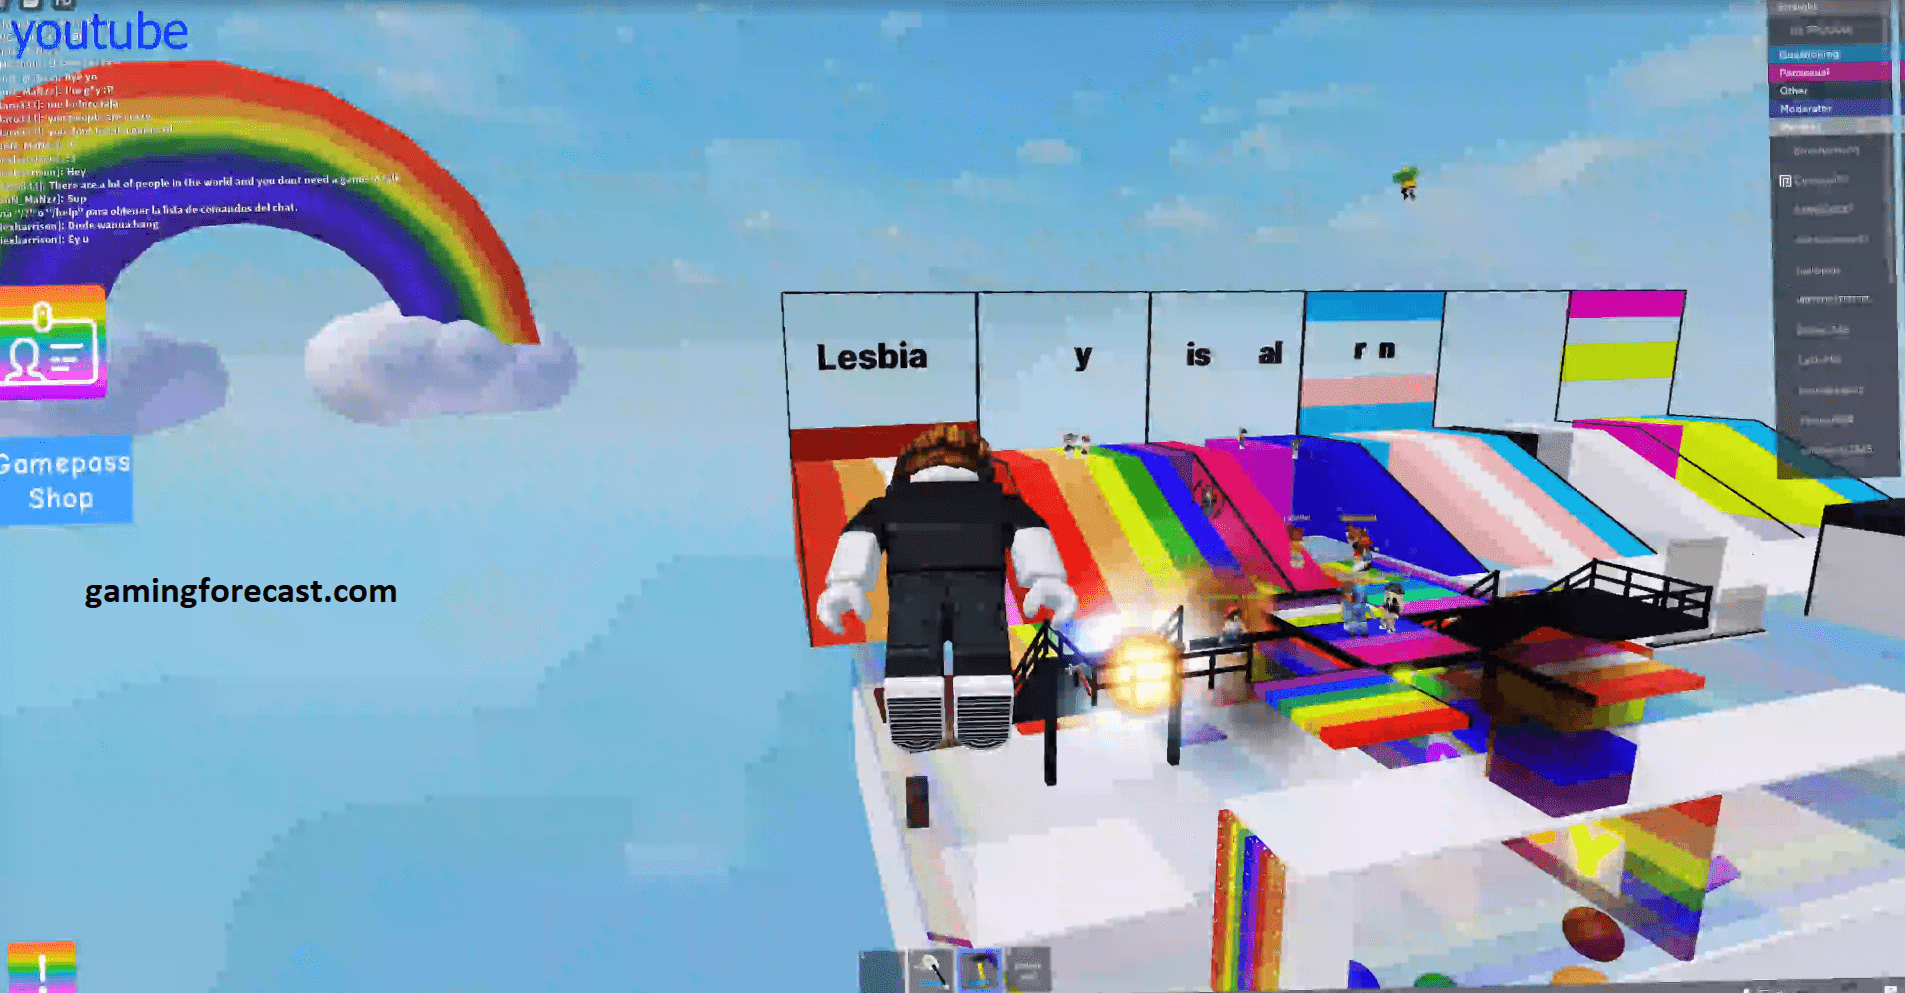 Roblox Hack Download Pc Destroy Lobby Fly Aimbot Scripts 2021 Gaming Forecast Download Free Online Game Hacks - how to hack a roblox game easy